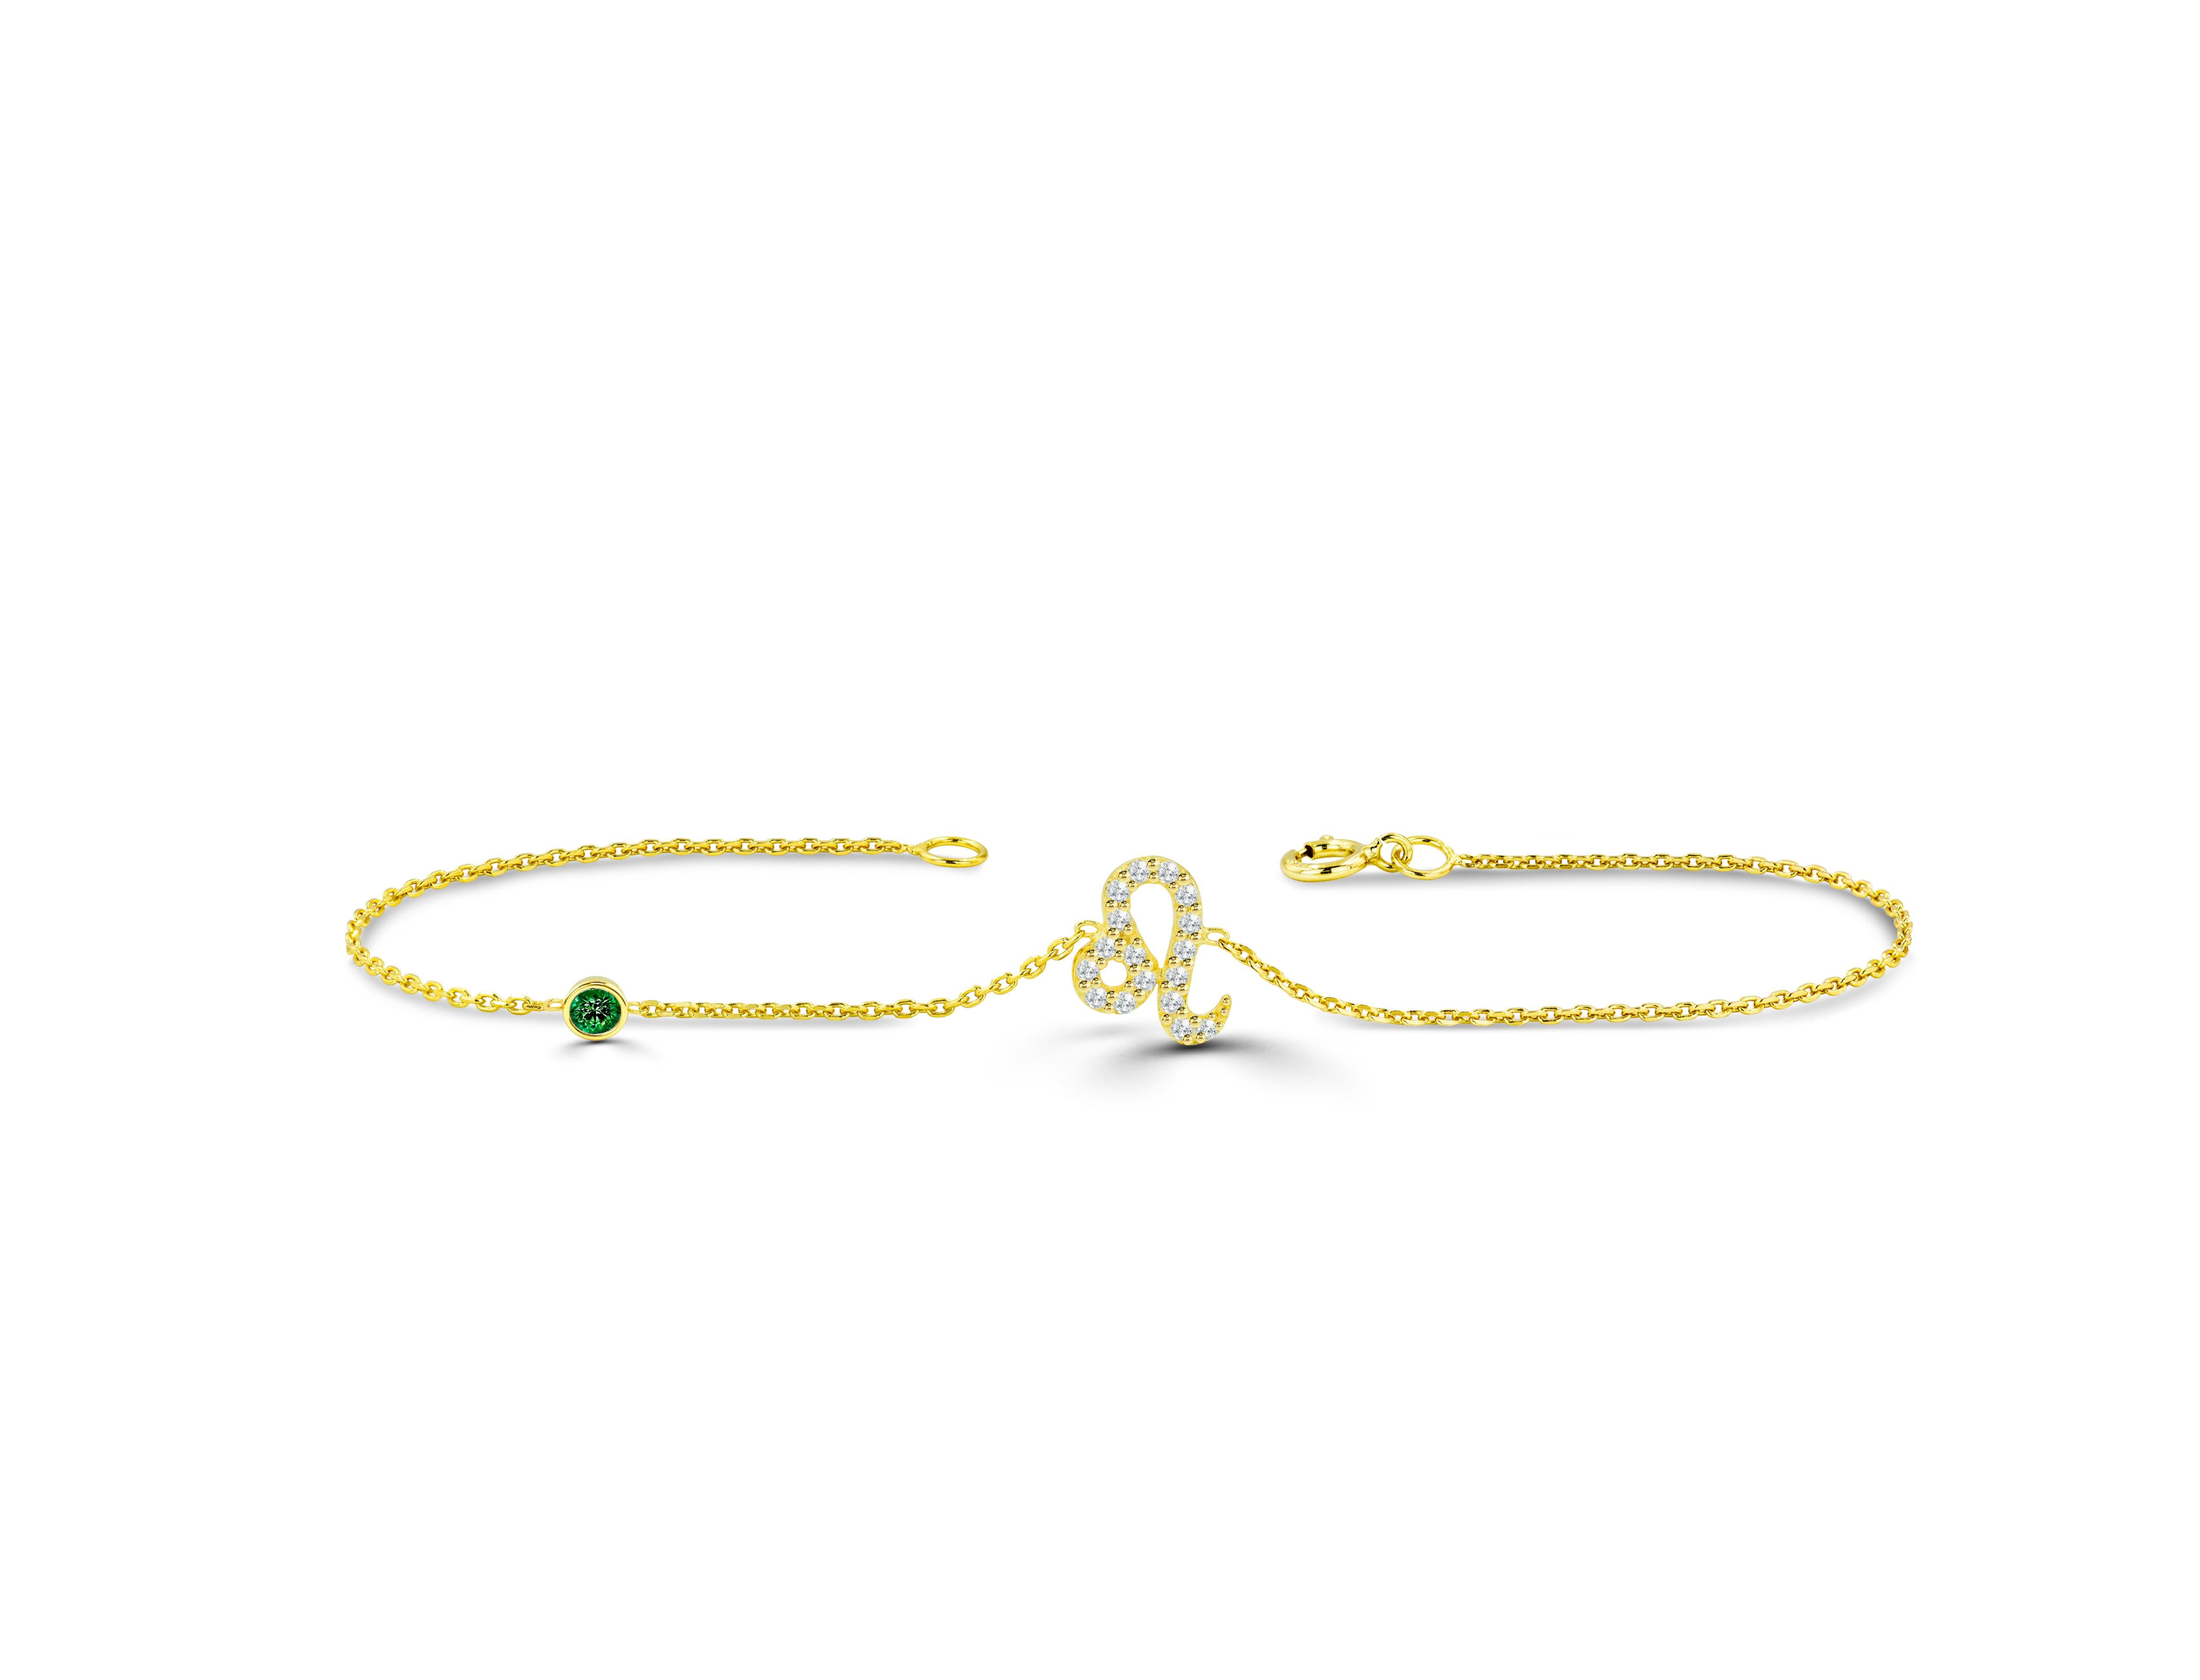 This Leo Diamond Bracelet is meant to represent you. This Zodiac sign bracelet comes with a birthstone of your choice- Ruby, Sapphire, or Emerald. Our collection of zodiac jewelry includes this stunning Diamond Leo Bracelet. All Leos out there,